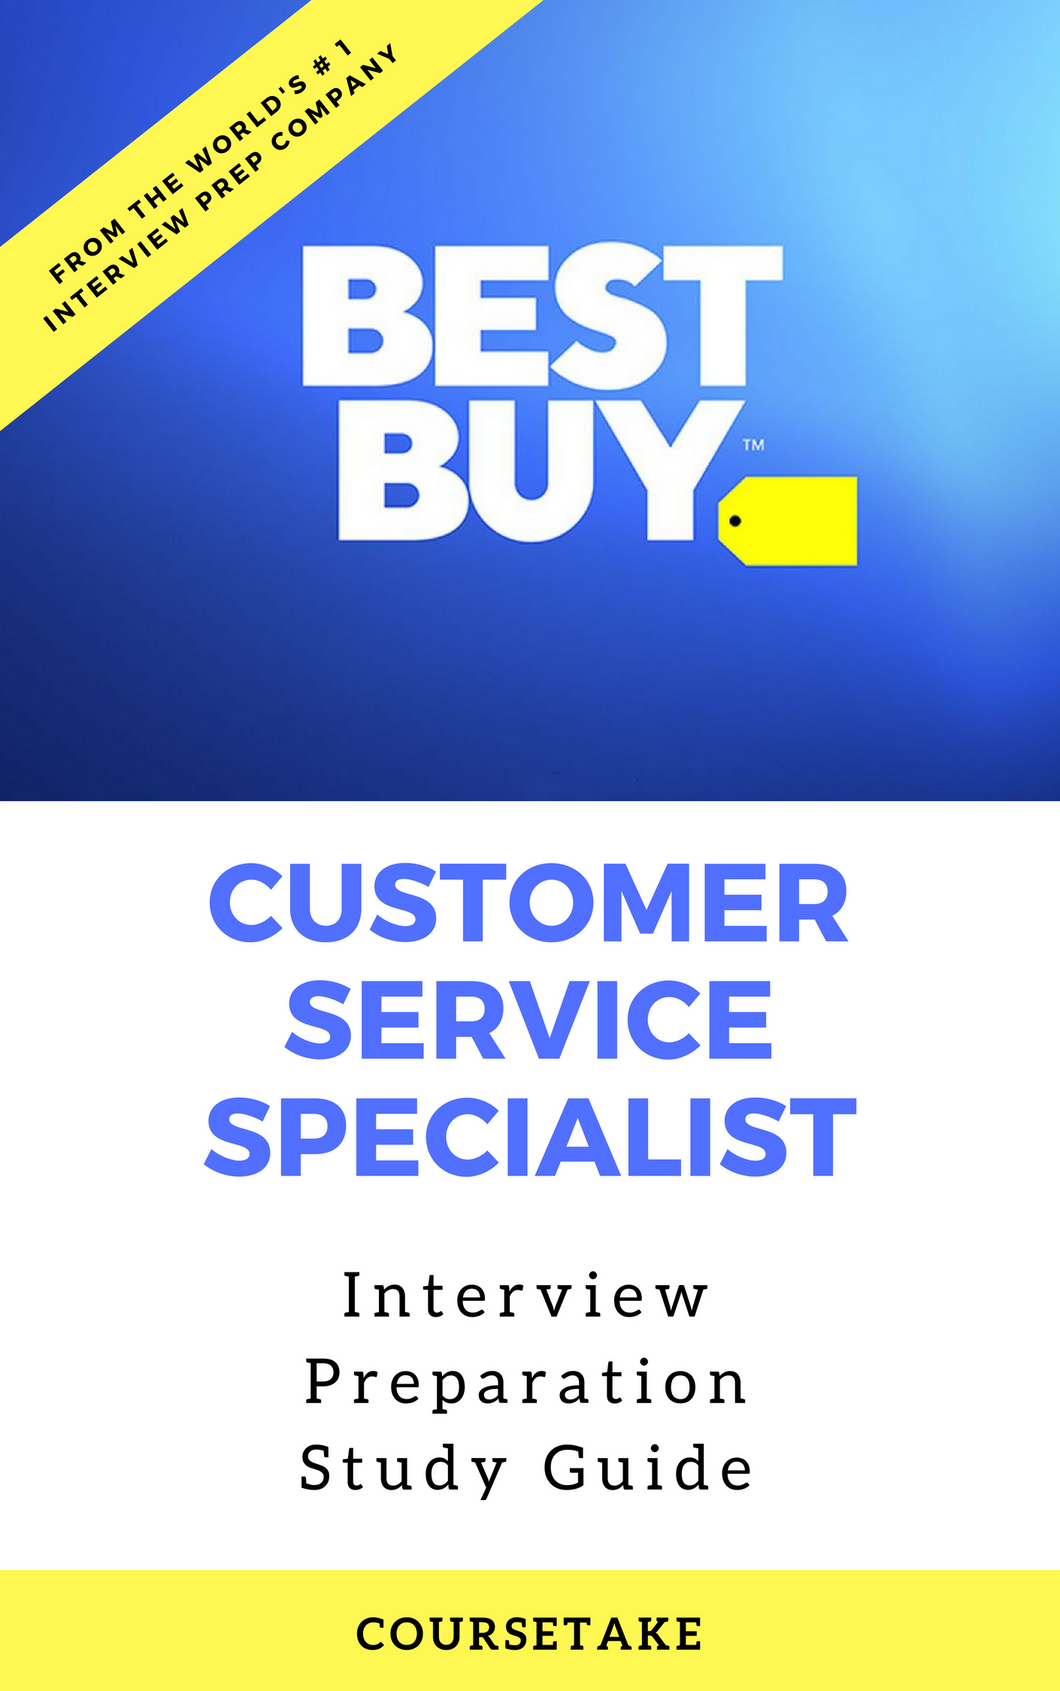 Best Buy Customer Service Specialist Interview Preparation Study Guide